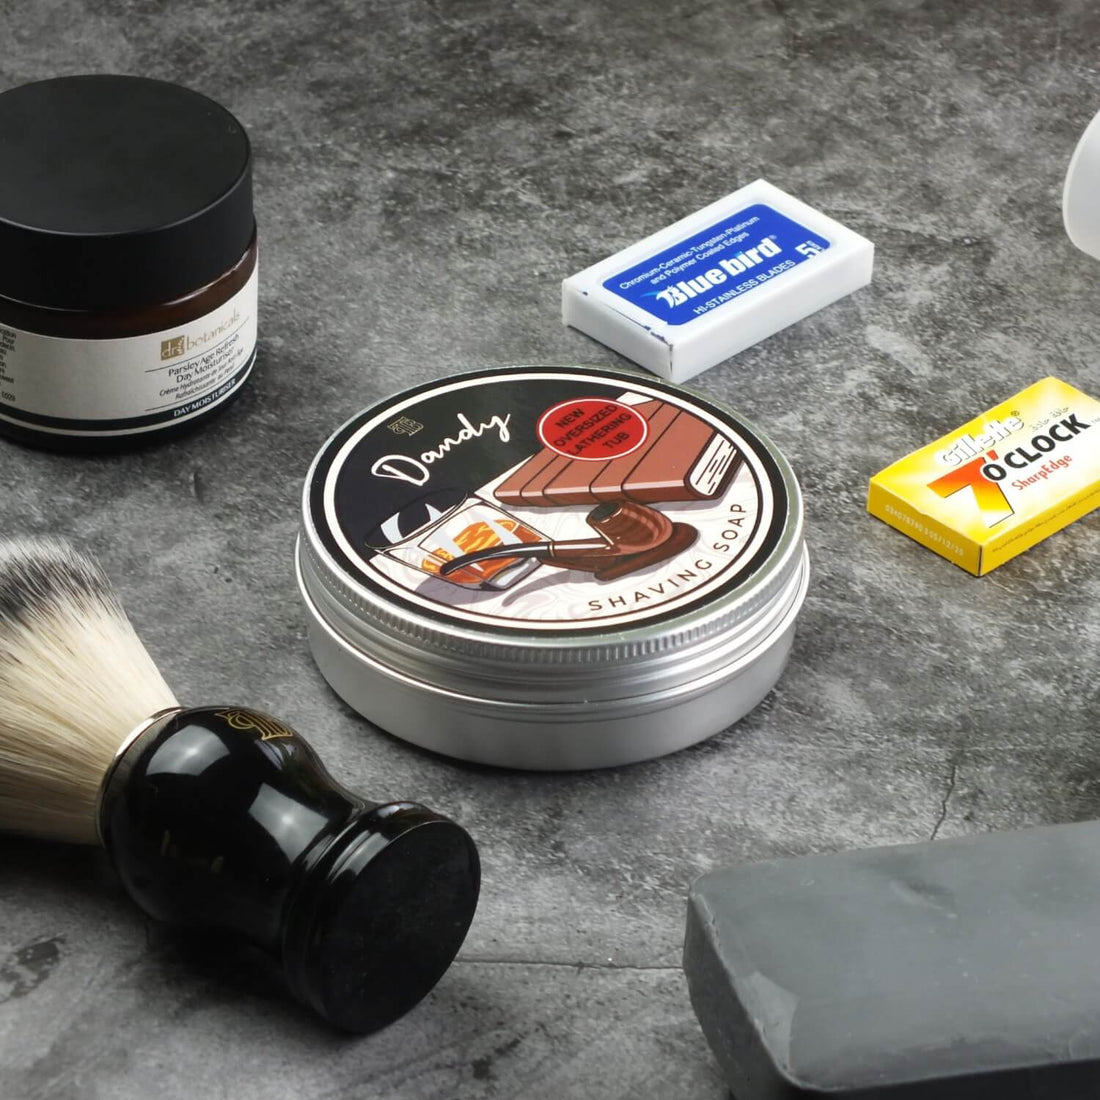 close up shot of our handmade Dandy shaving soap on a marbled surface with other shaving kit items next to it